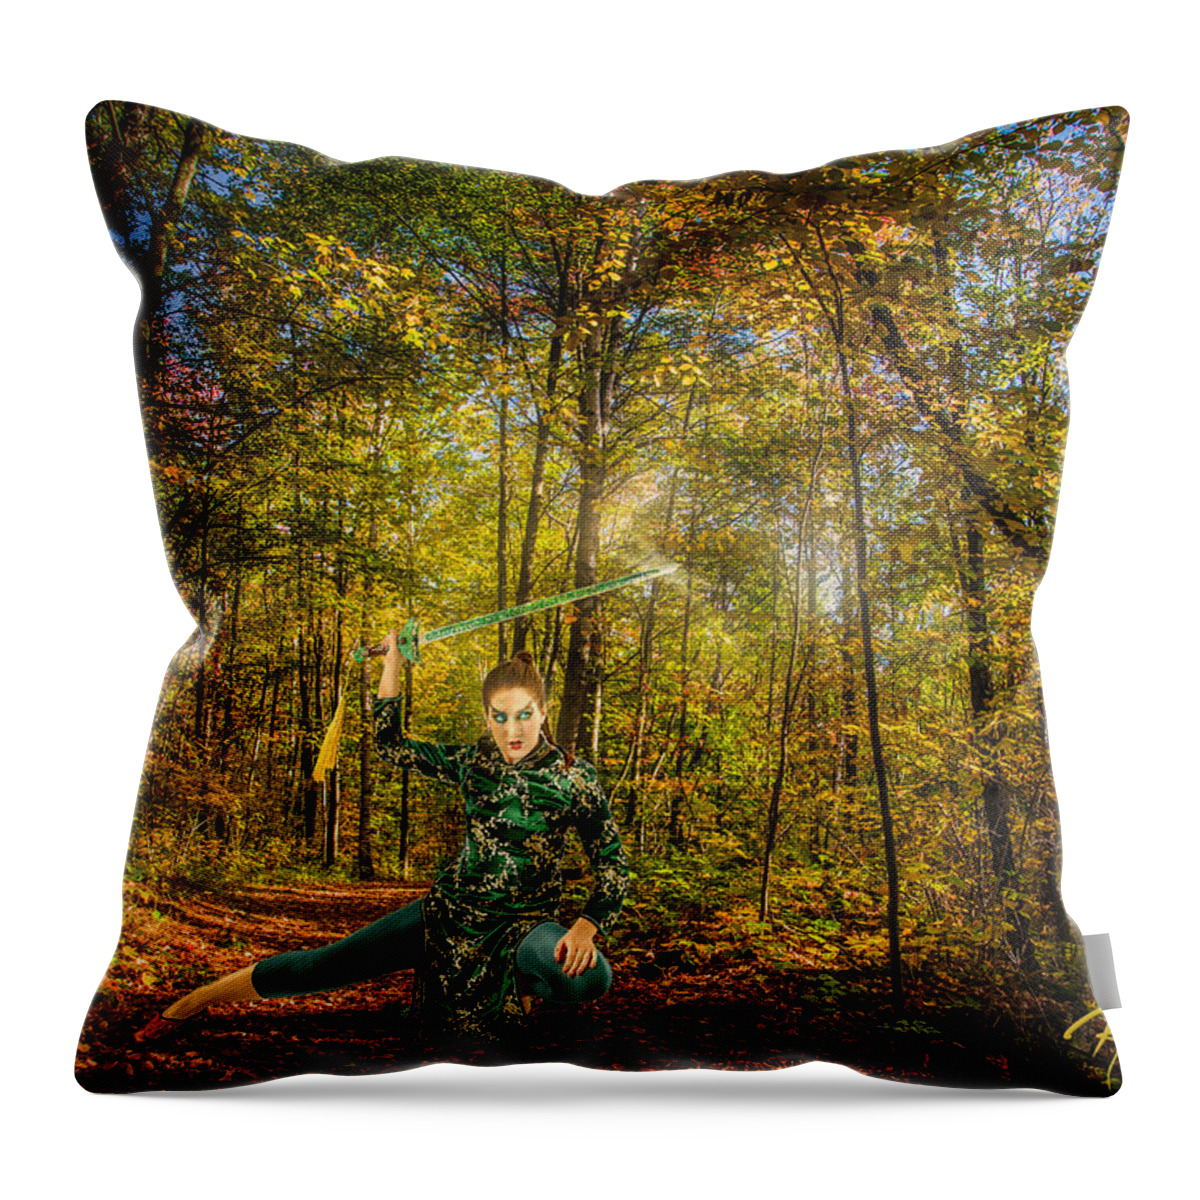 Chinese Swords Woman Throw Pillow featuring the photograph Swords Woman by Rikk Flohr